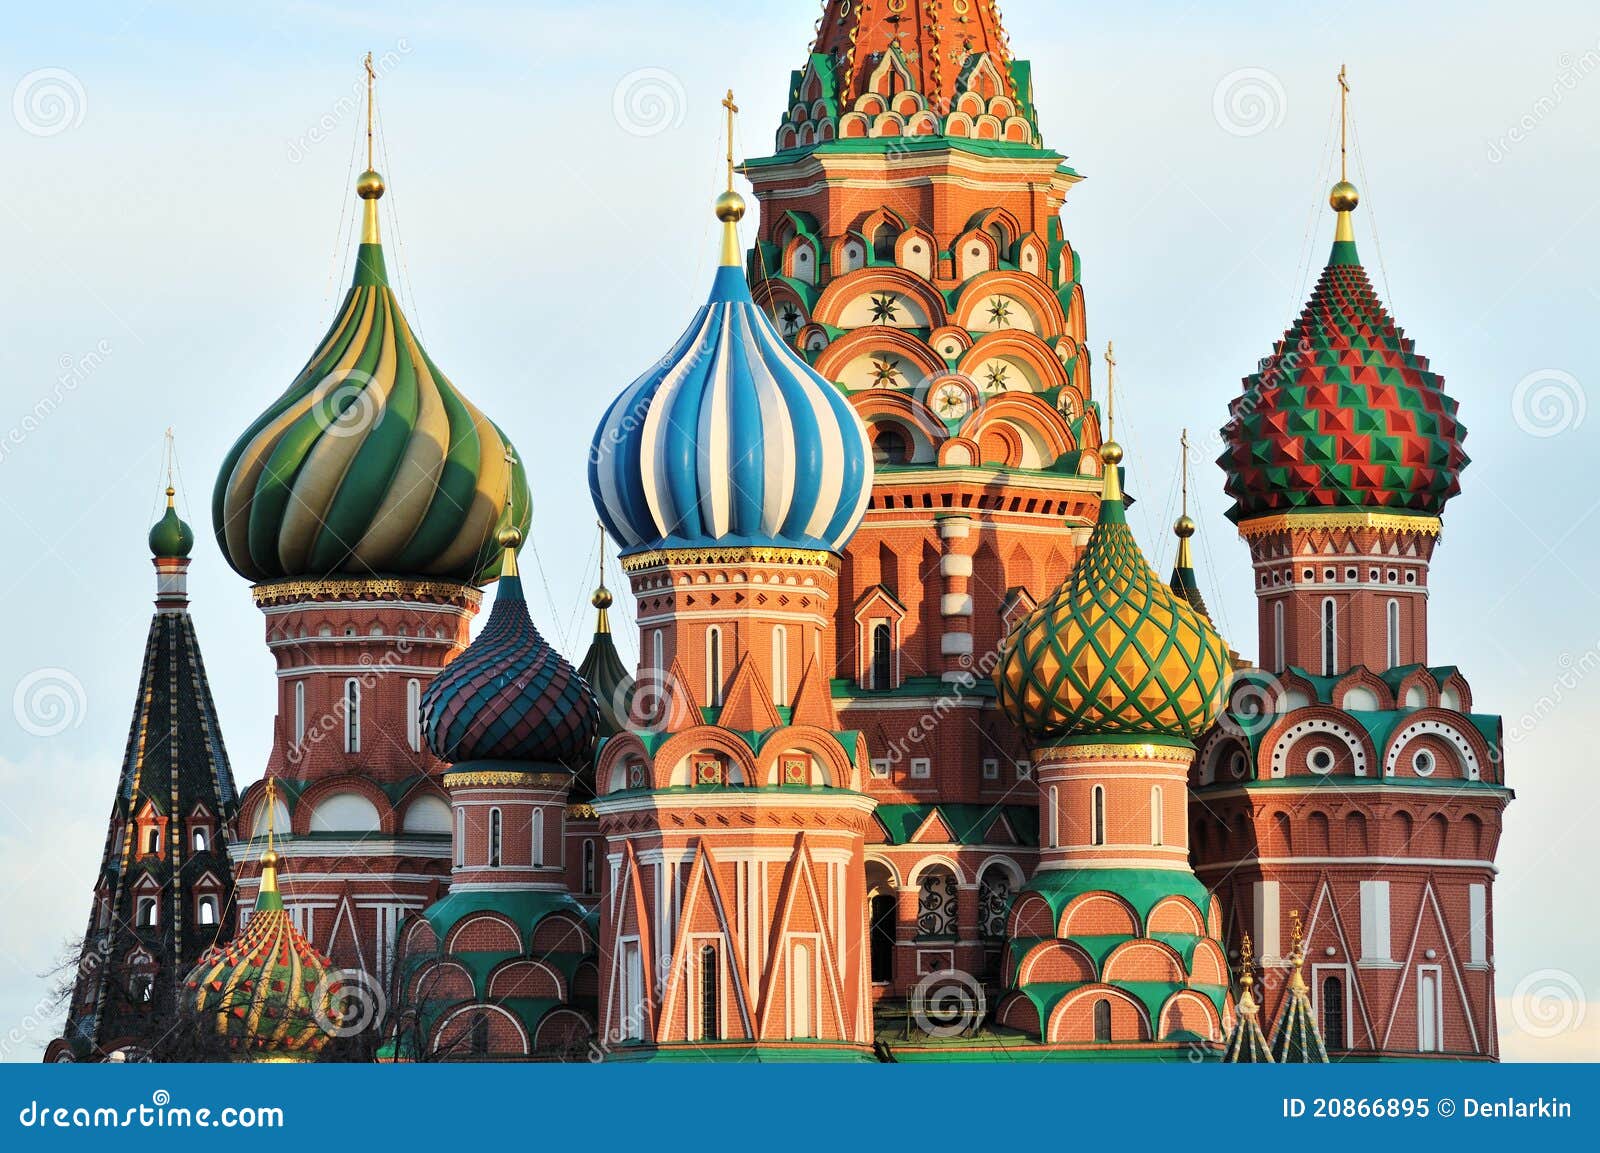 cupola of st. basil's cathedral